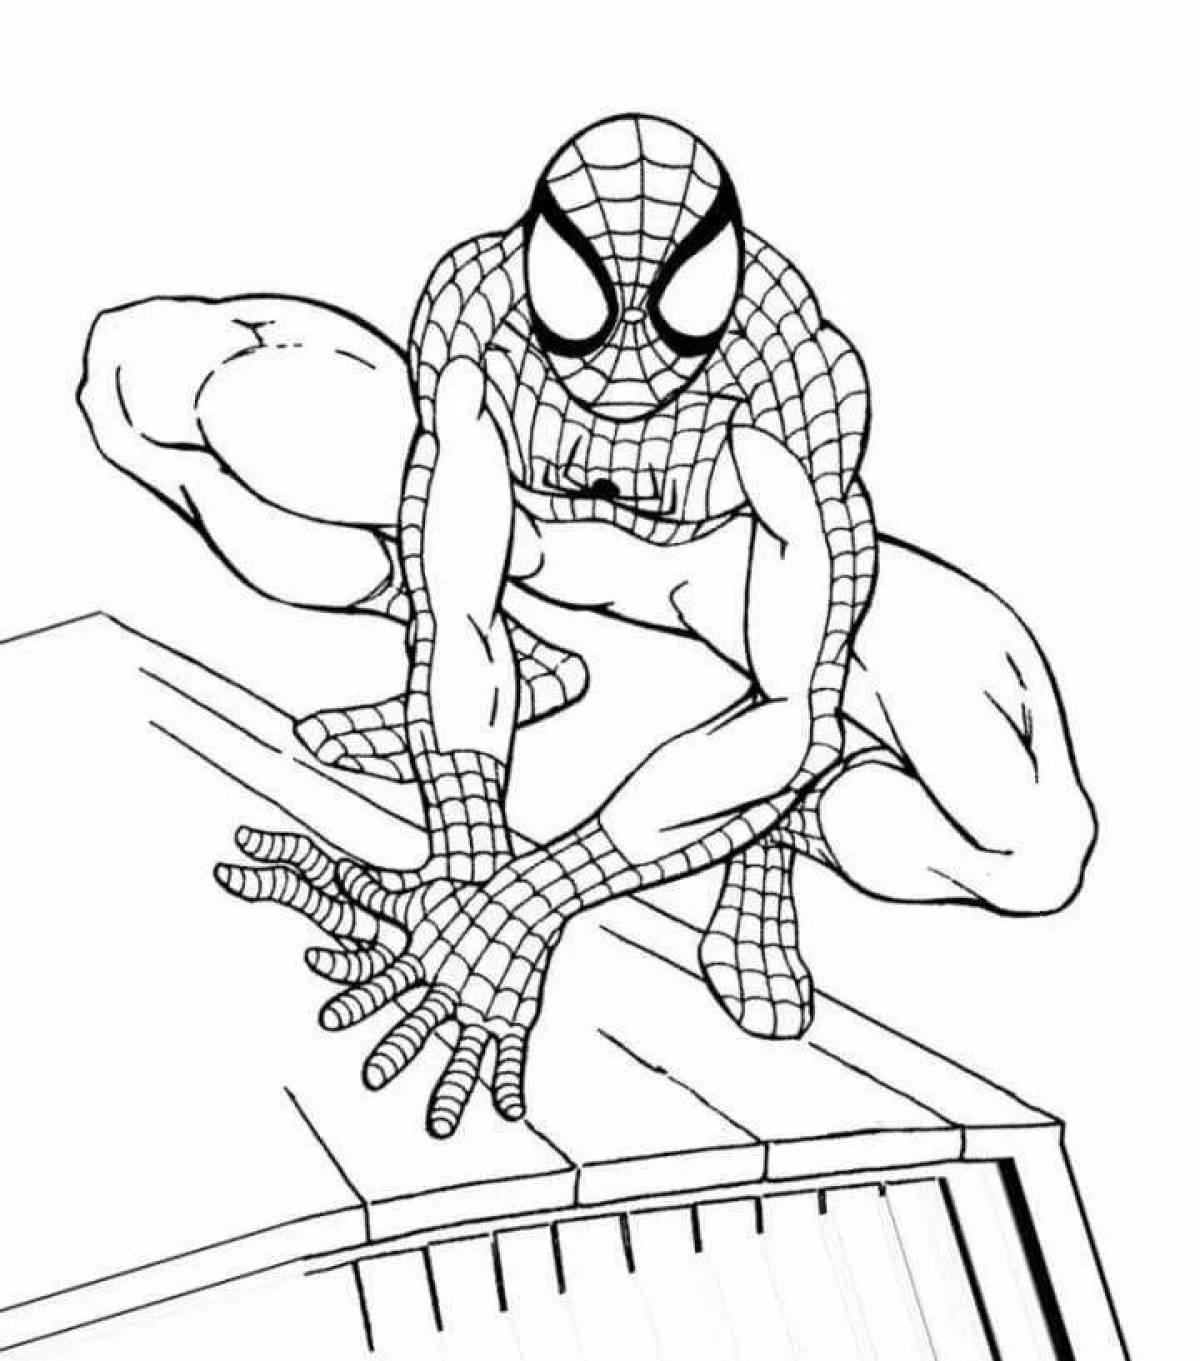 Incredible Spiderman coloring book for 5 year olds